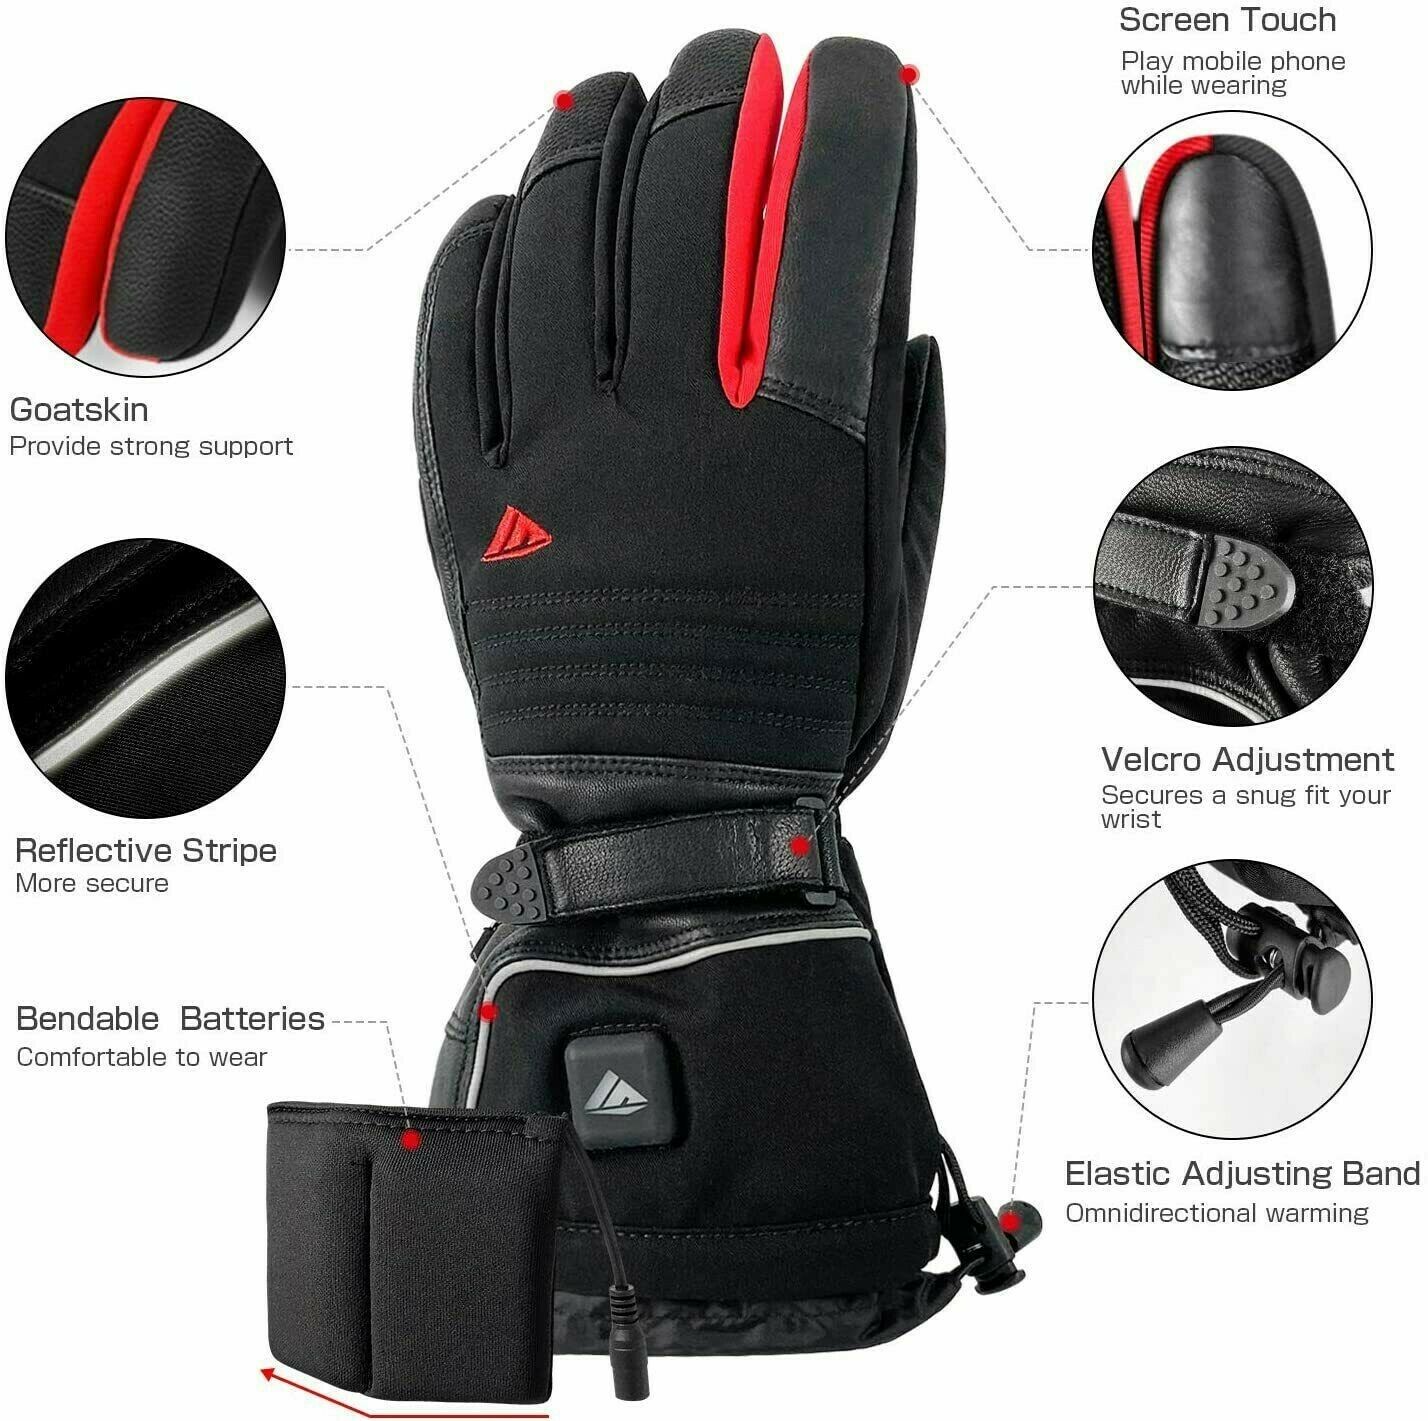 SabotHeat Battery Heated Gloves - Electric Heated Gloves for Men (XL) - e4cents